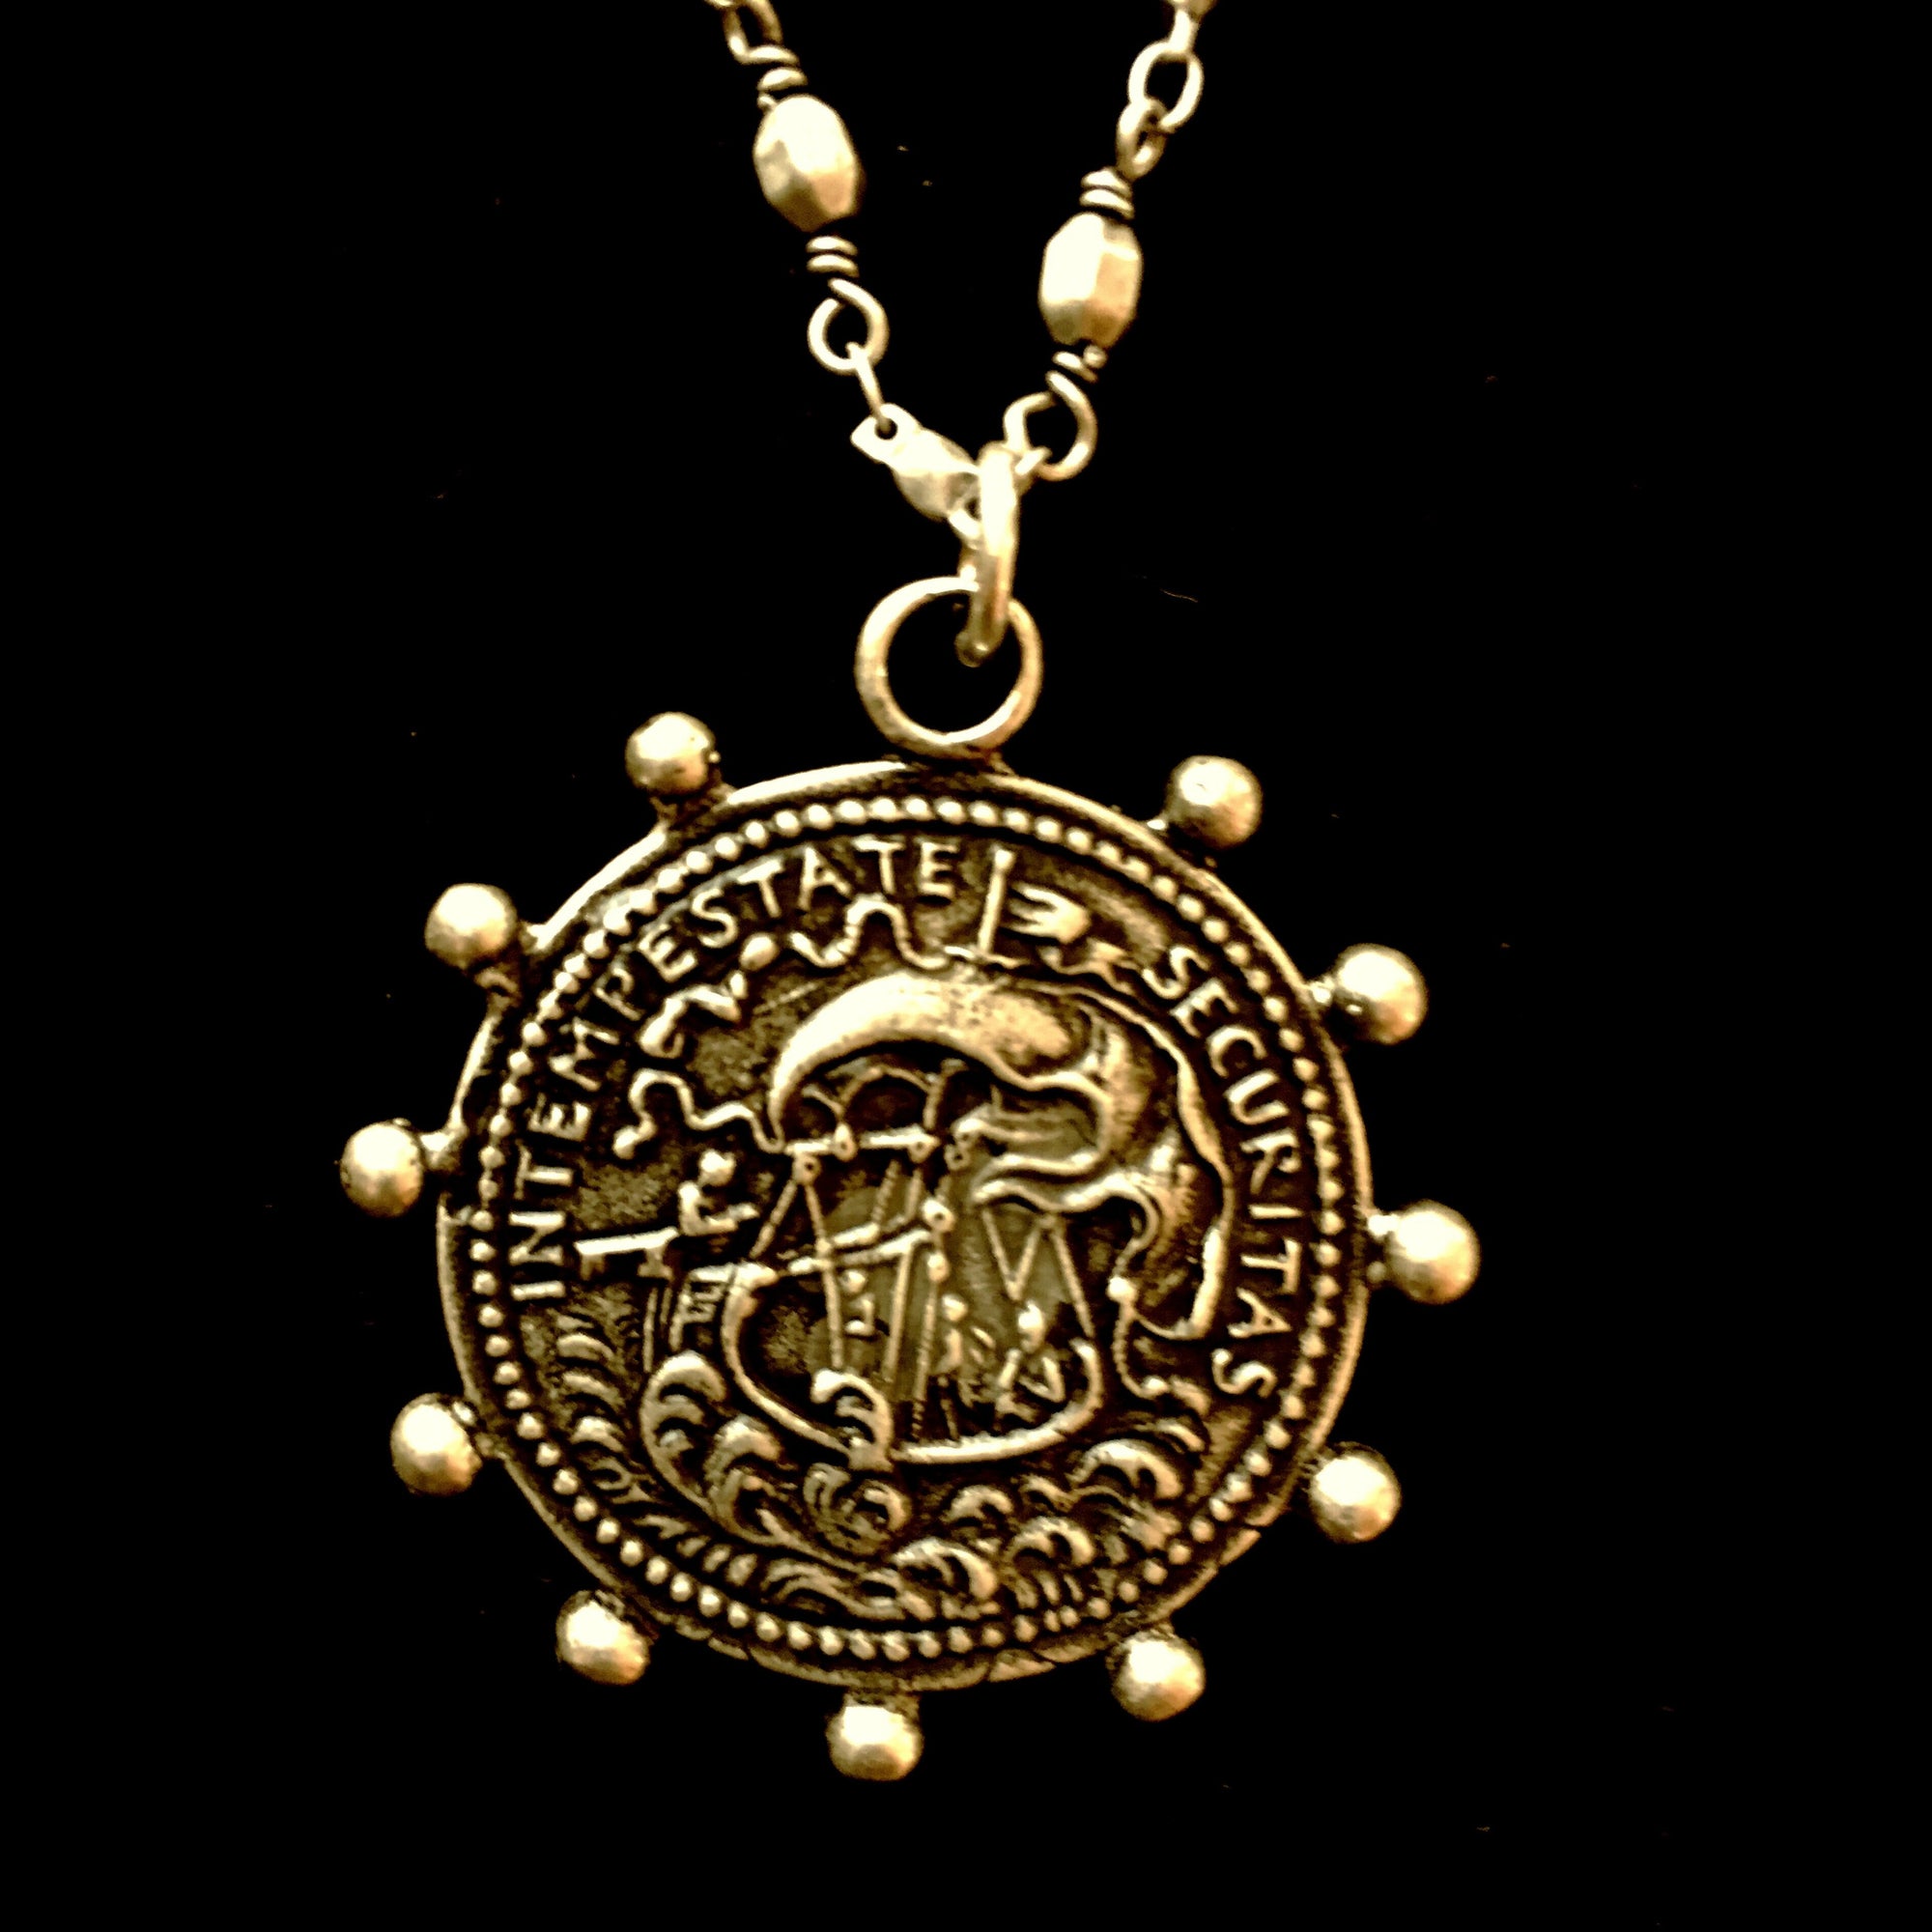 Saint George Patron Saint of Equestrians Chain Necklace  by Whispering Goddess - Gold